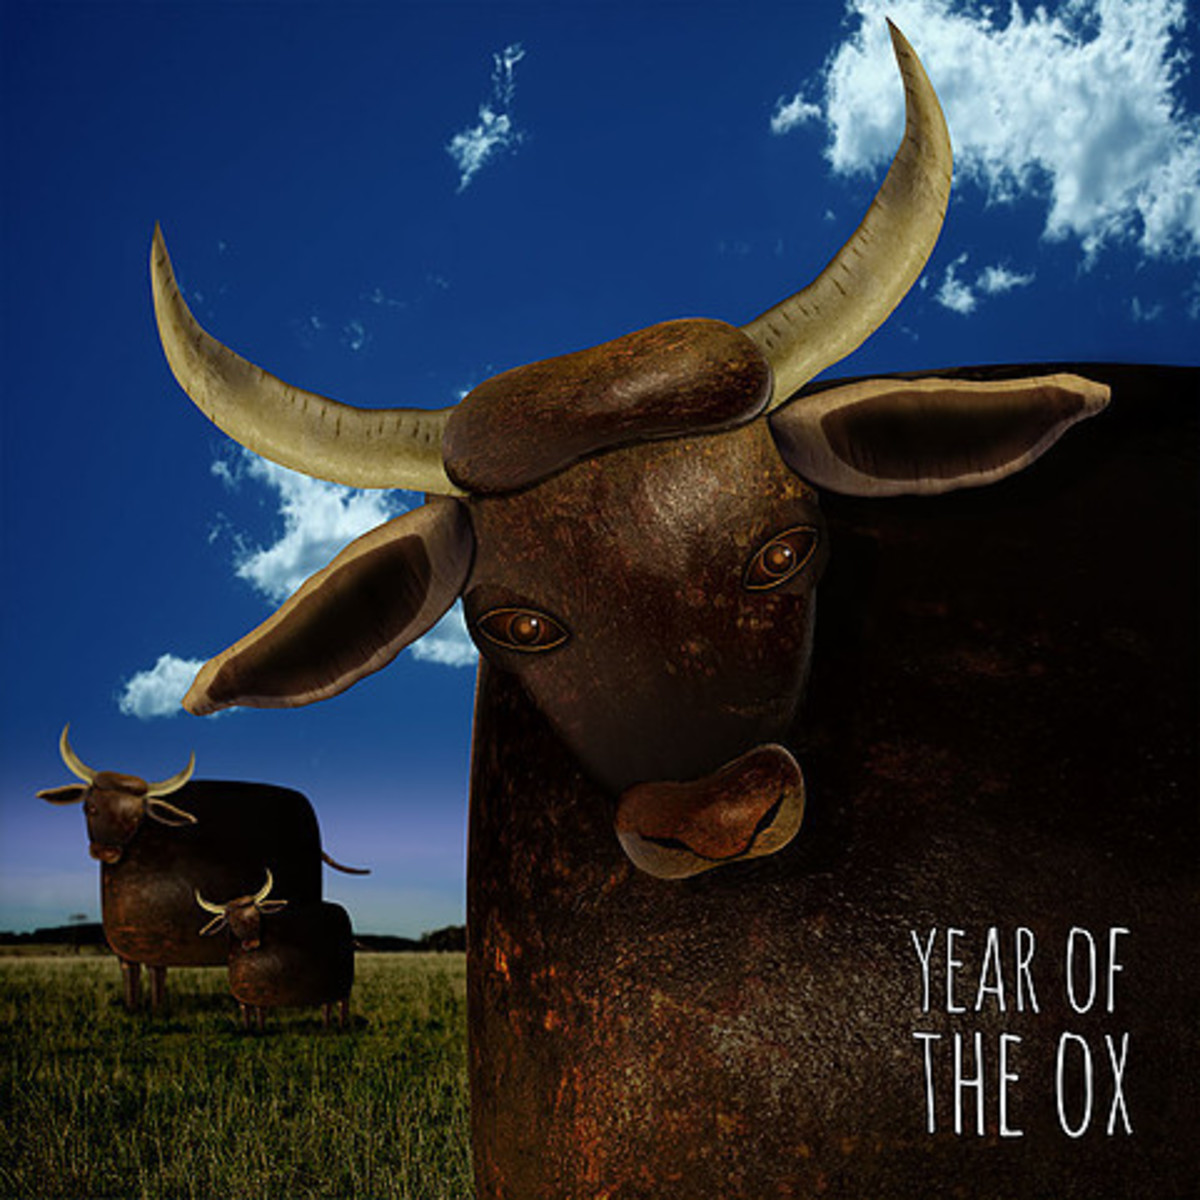 The Year of The Ox